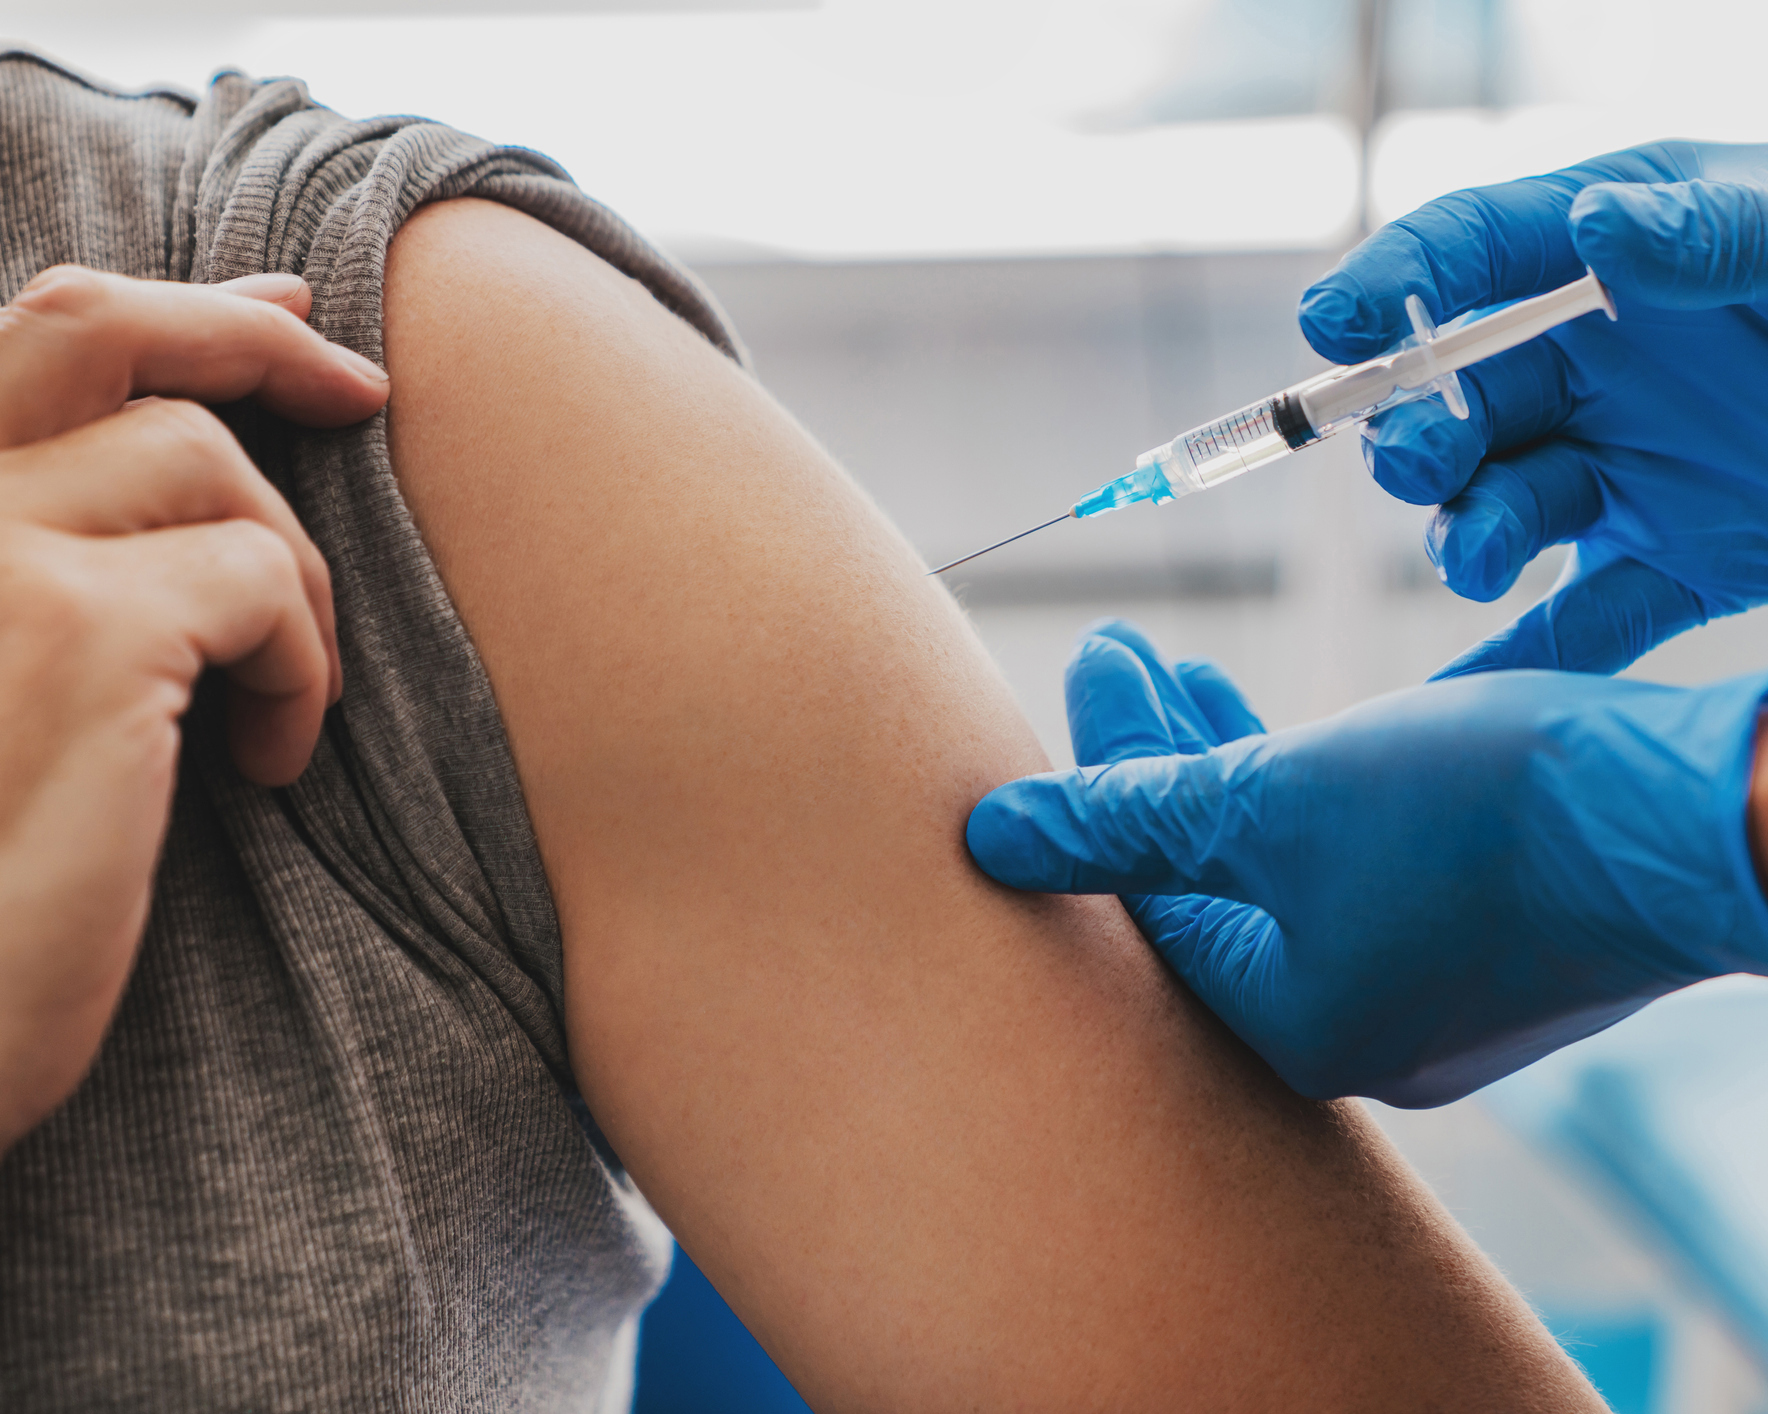 stock photo of man getting vaccine in arm